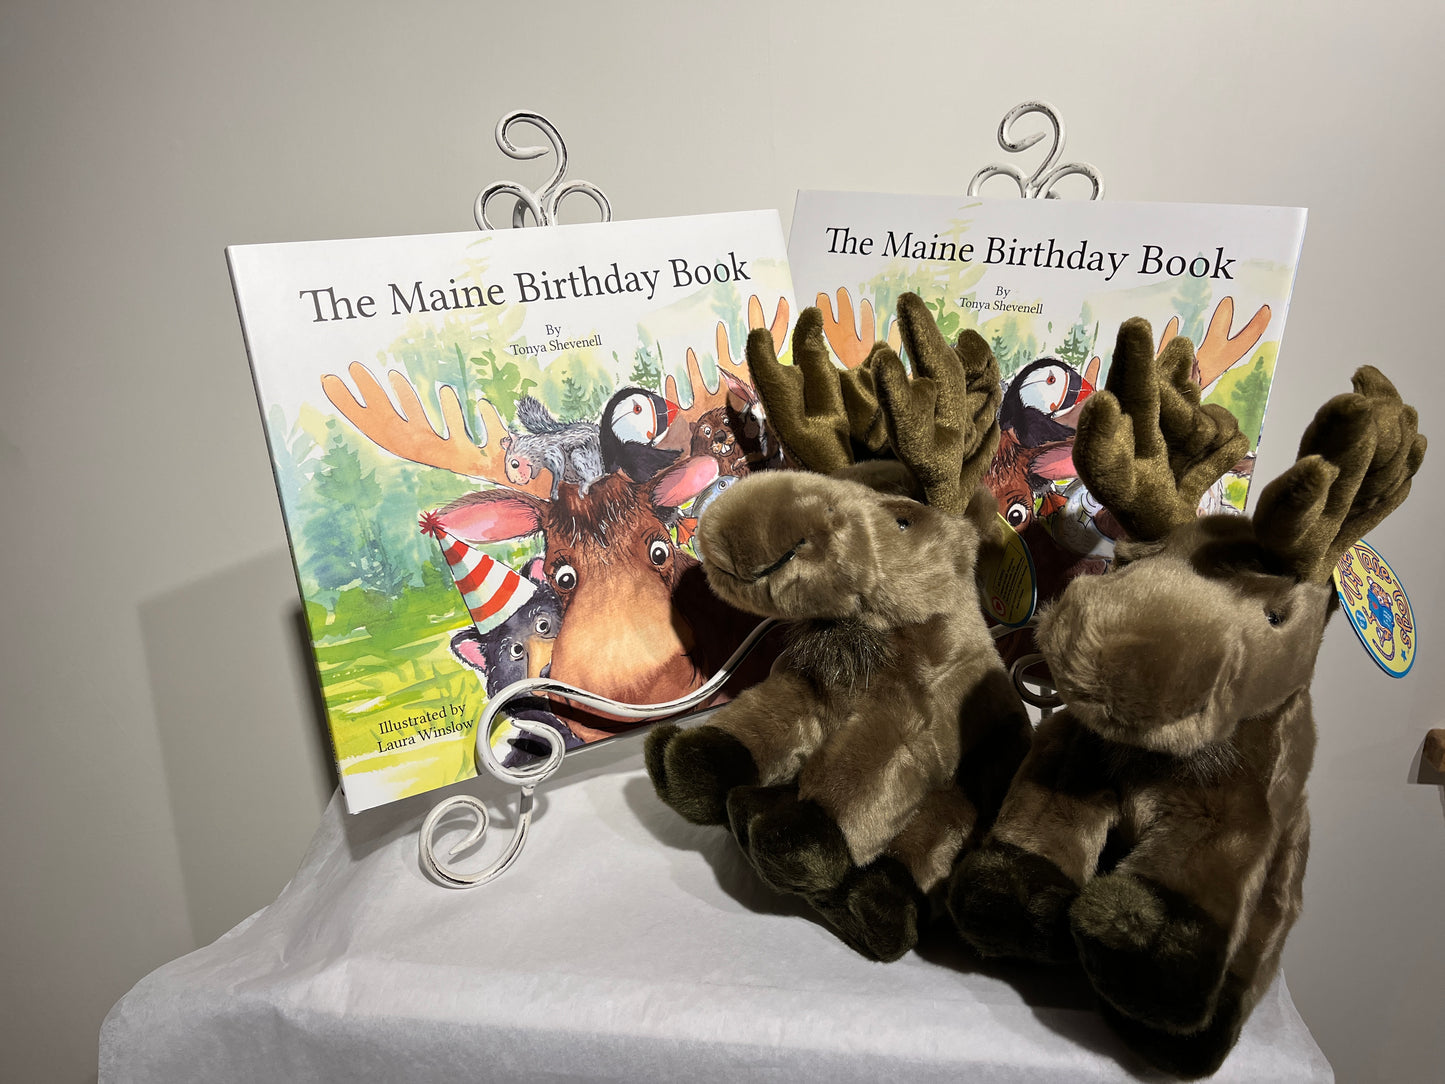 Two Maine Birthday Books and Two Stuffed Moose